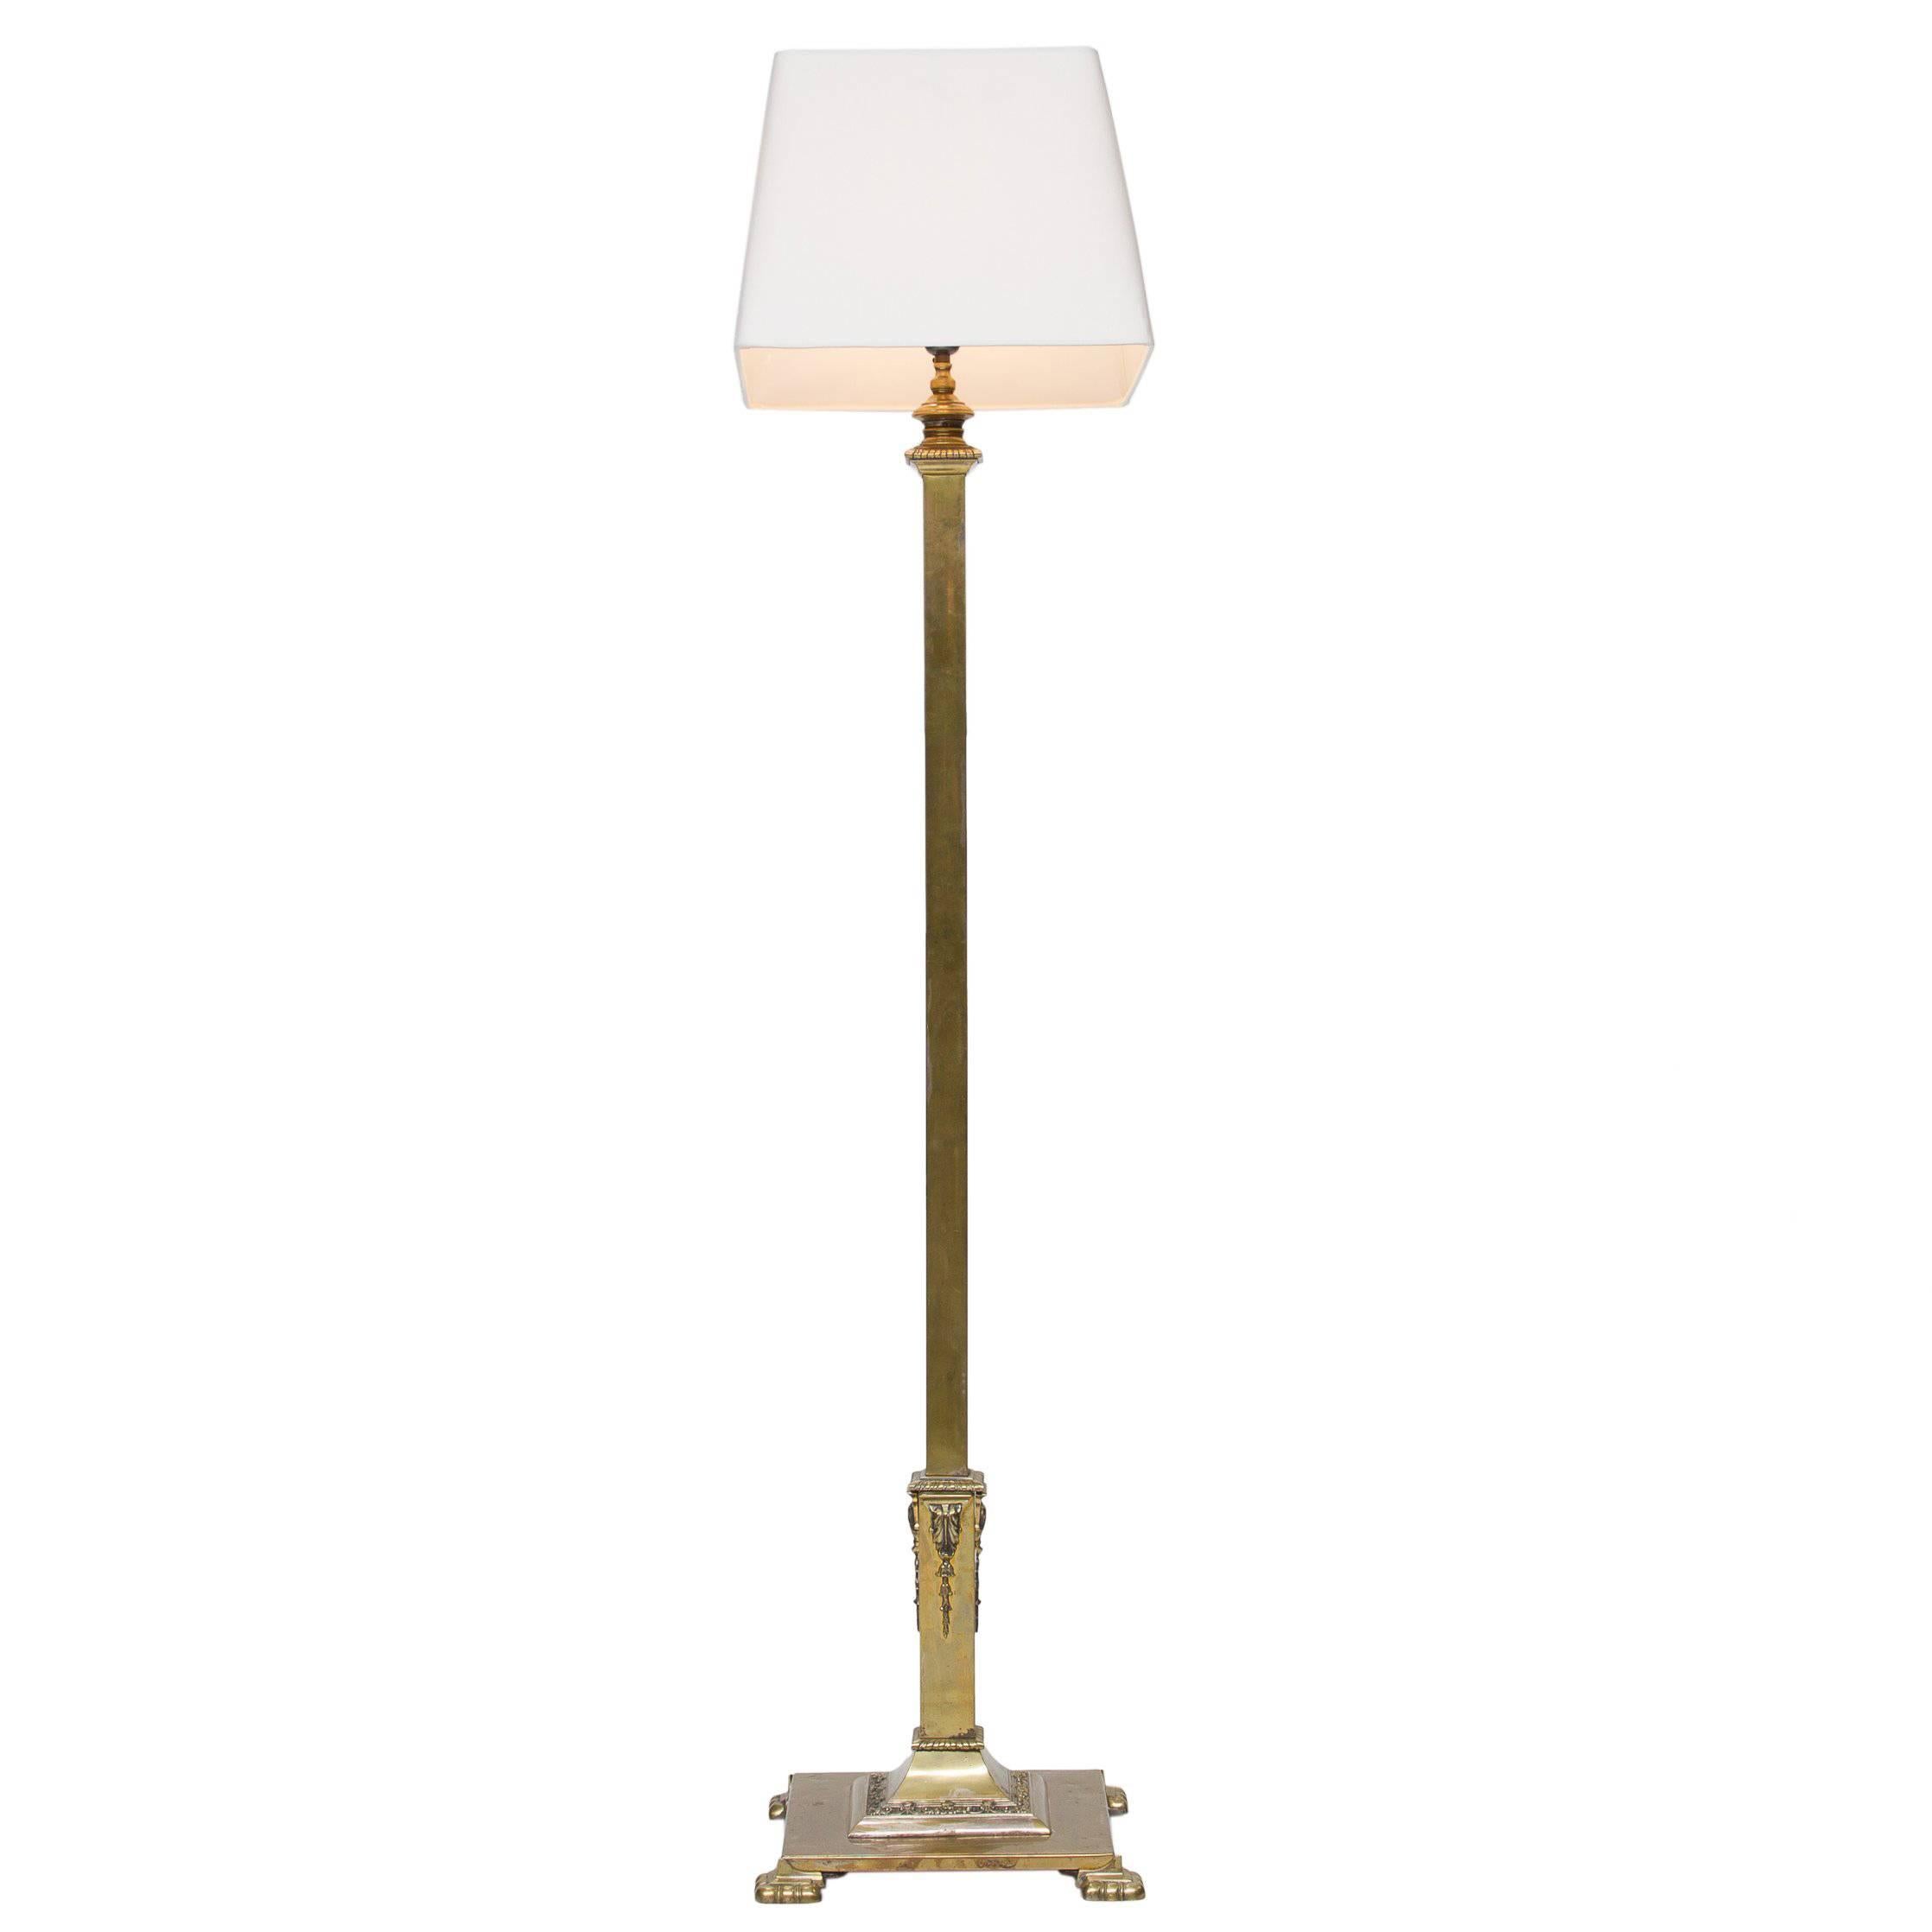 Vintage French Brass Floor Lamp At 1stdibs, Antique French Brass Floor Lamp